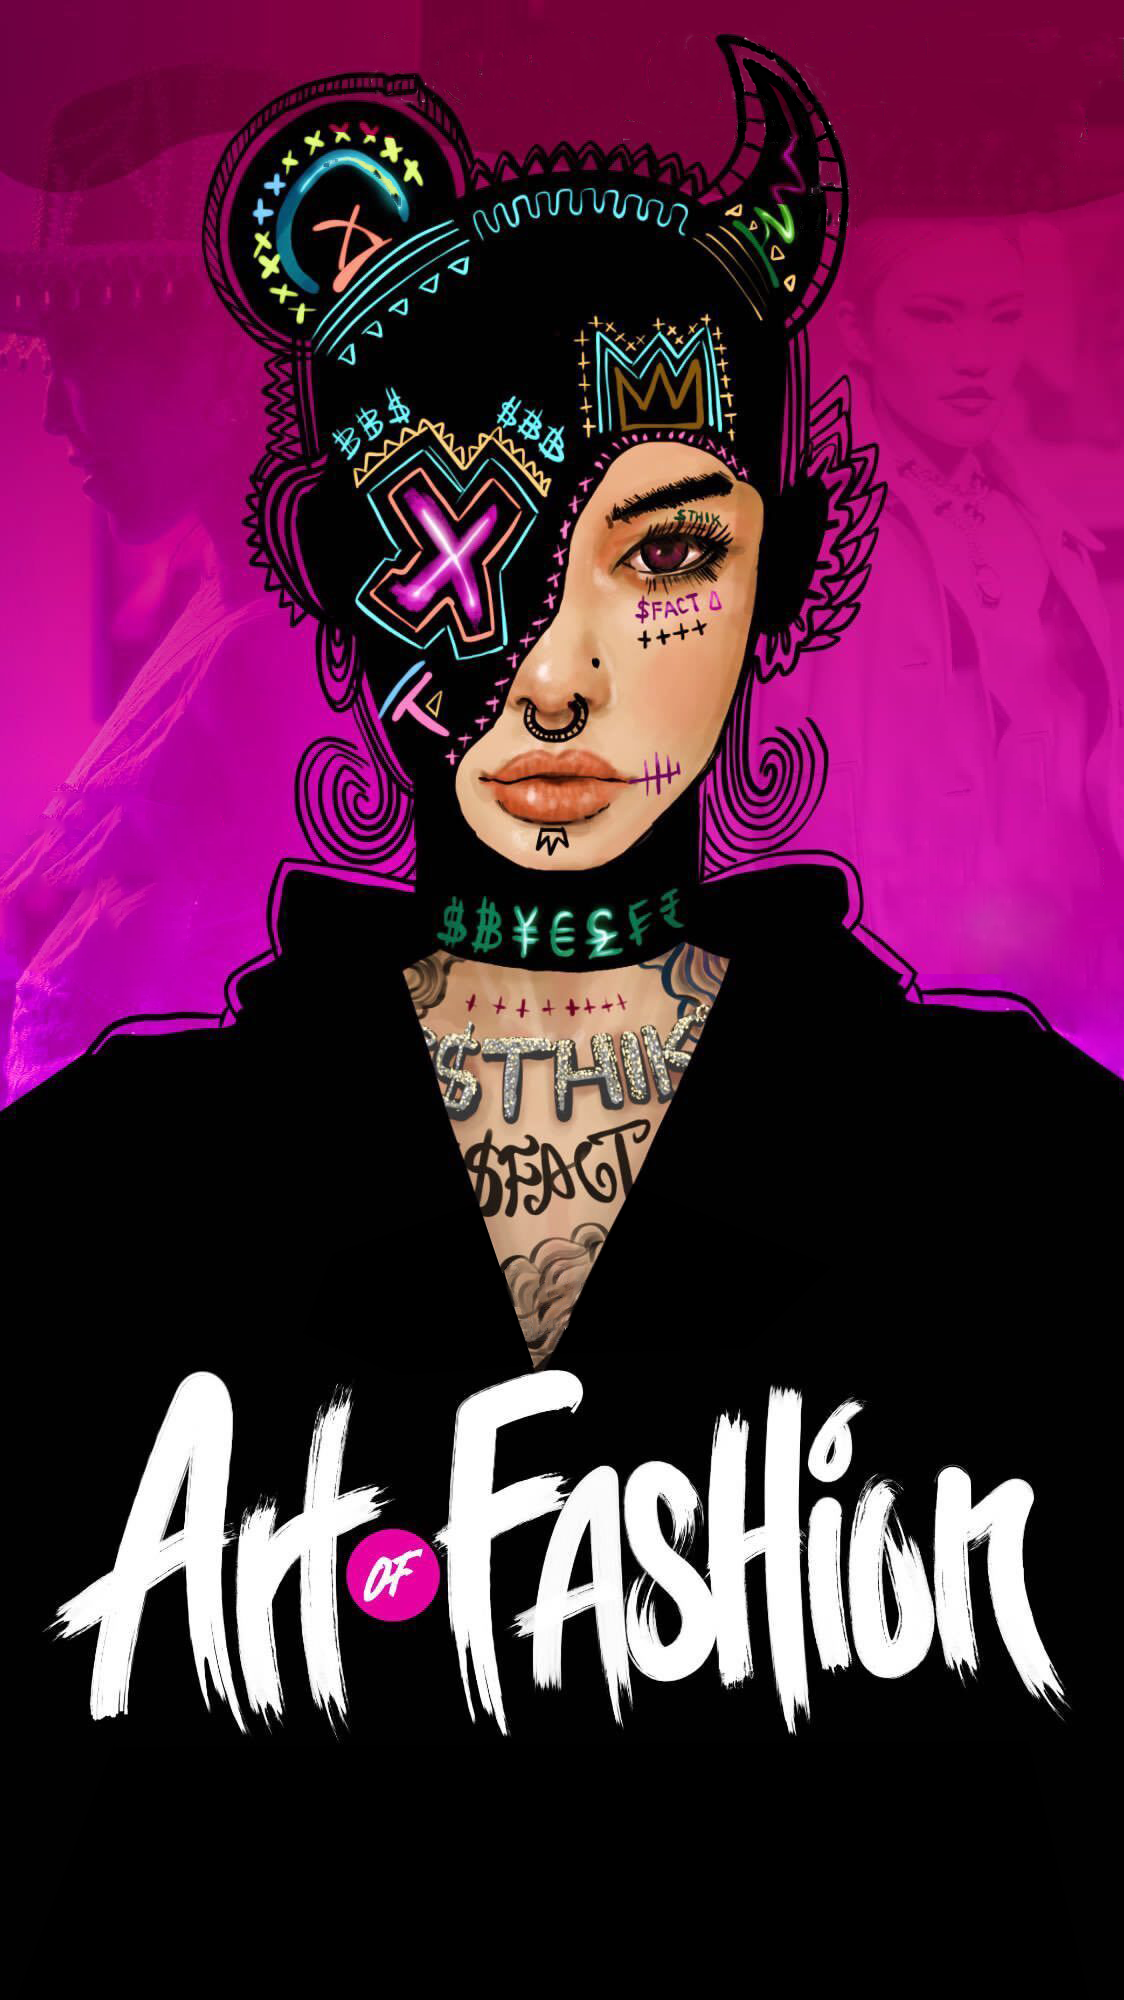 The Art of Fashion Unveils Inaugural Networking, Art, Fashion, and NFT Event in Toronto